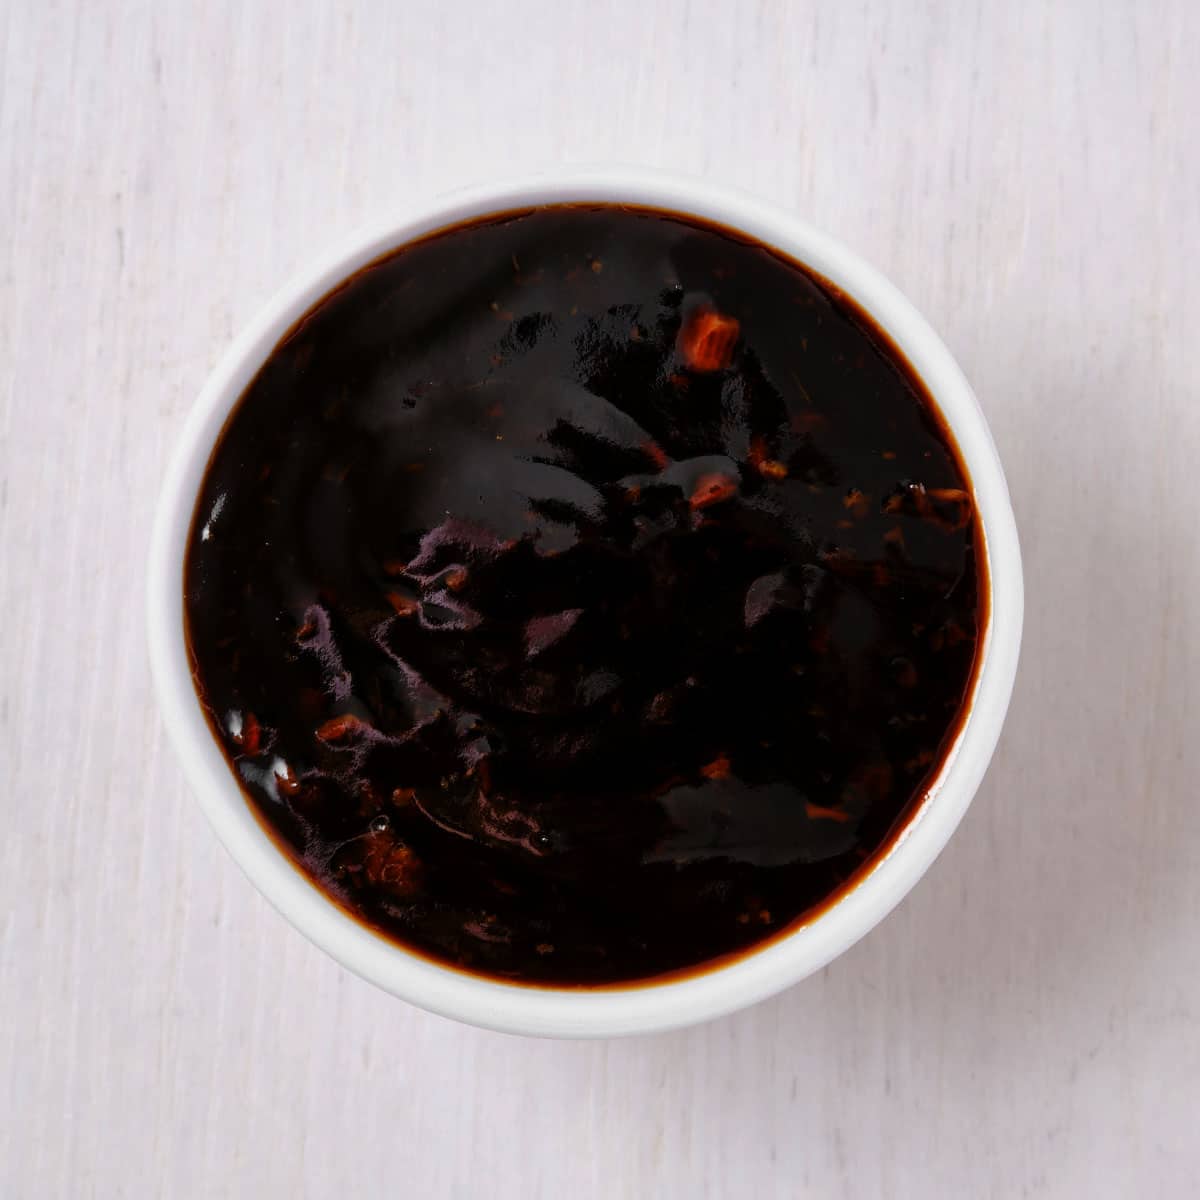 This Soyaki sauce was the perfect blend of sweet, savory, and tangy flavors, perfect for marinating or as a dipping sauce for various dishes.